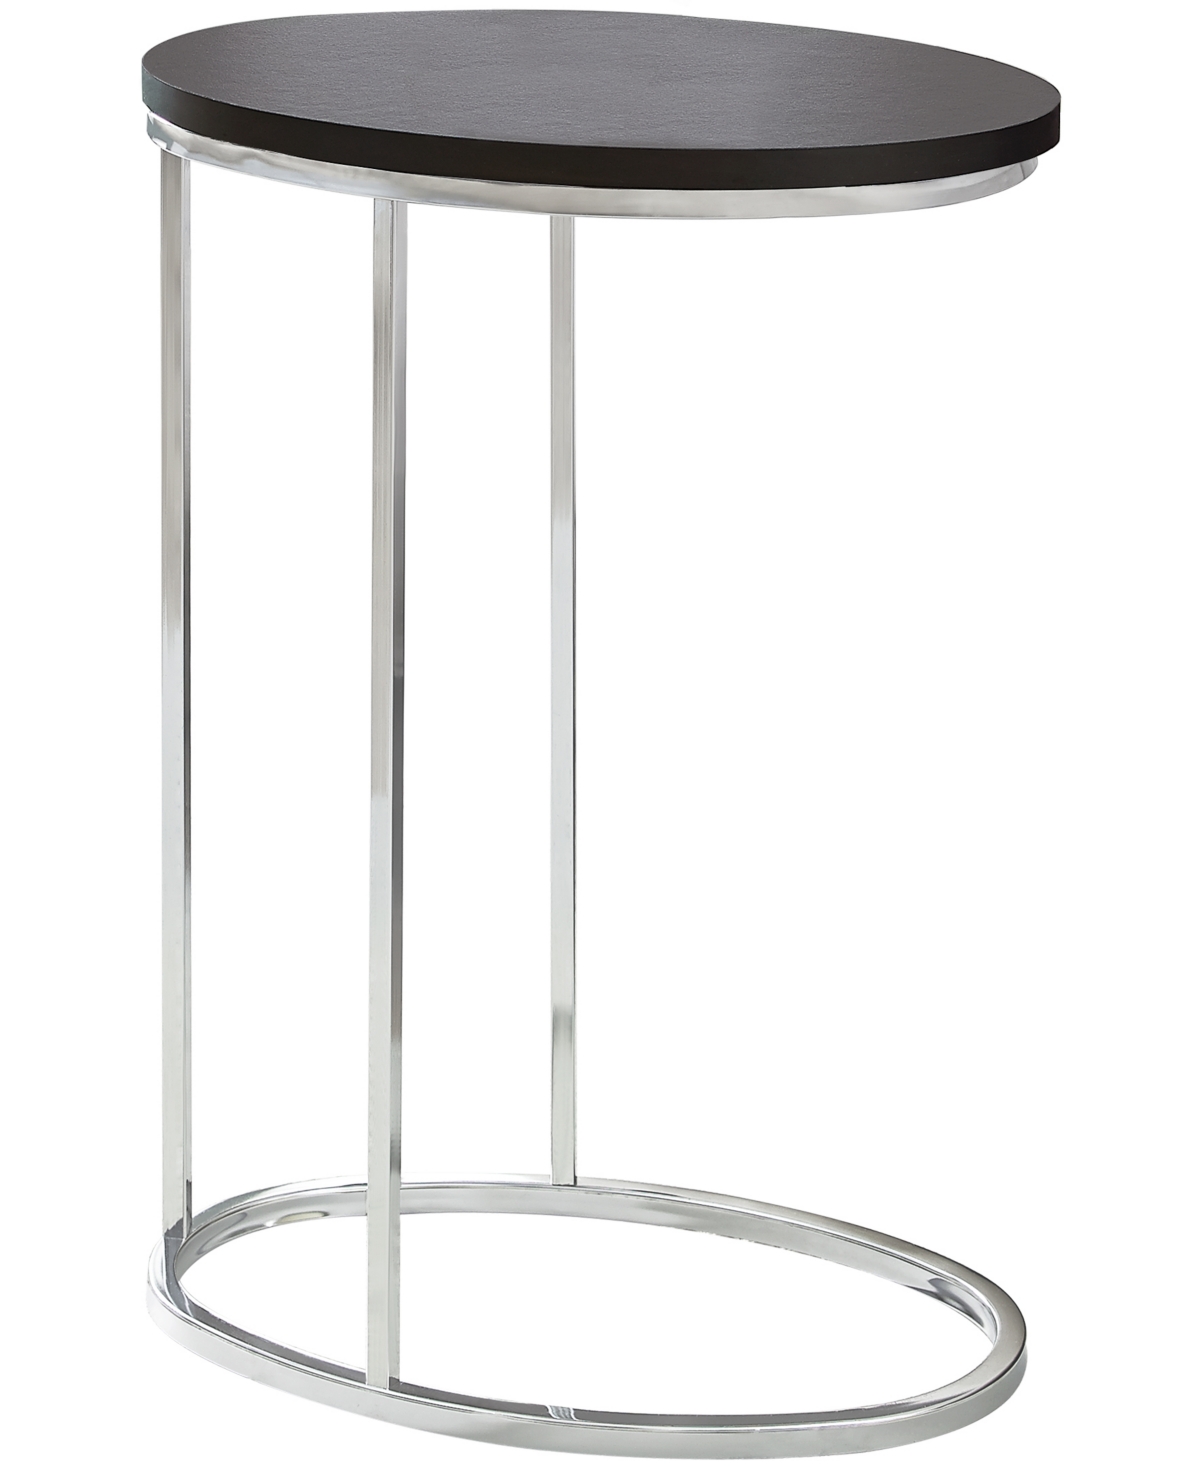 UPC 680796000028 product image for Monarch Specialties Chrome Metal Oval Edgeside Accent Table in Cappuccino | upcitemdb.com